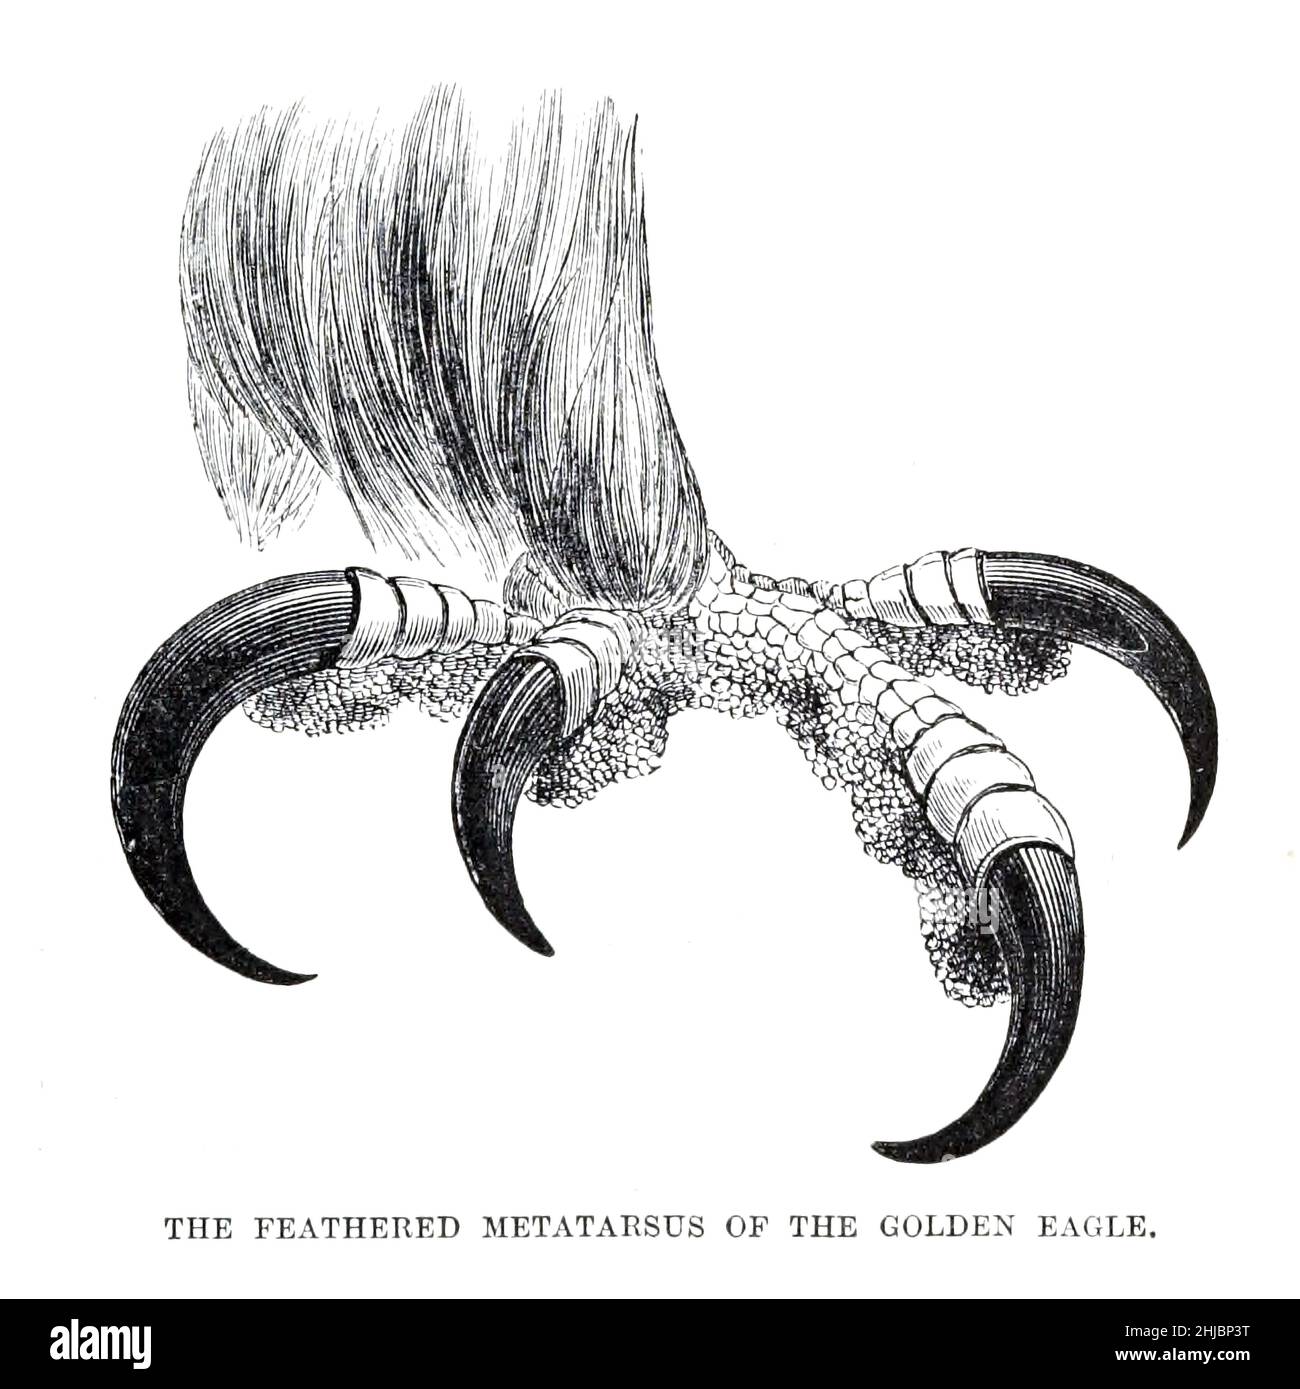 The Feathered metatarsus of the Golden Eagle from the The royal natural history edited by Richard Lydekker, Volume IV published in 1895 Stock Photo